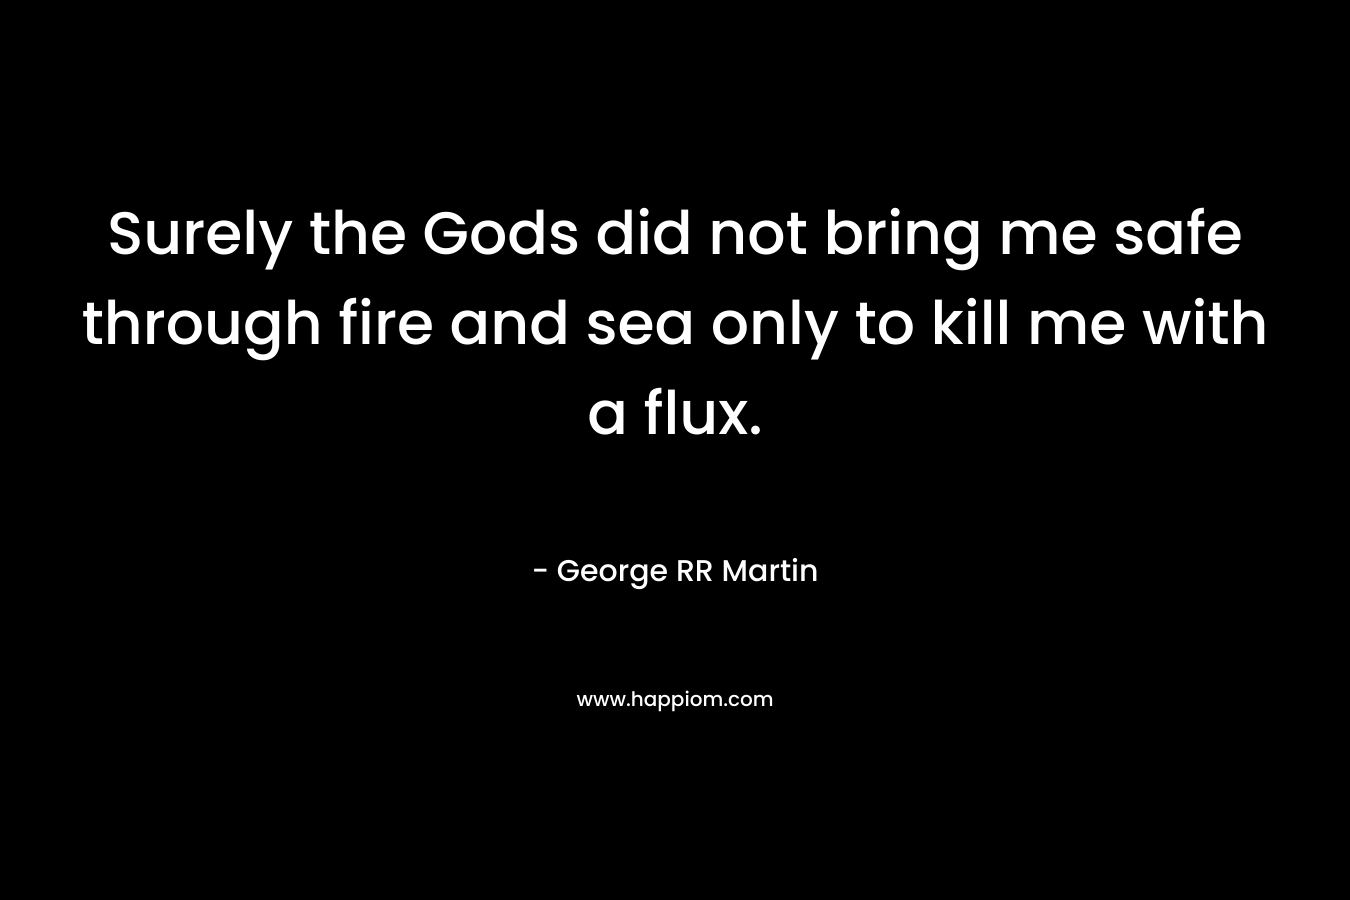 Surely the Gods did not bring me safe through fire and sea only to kill me with a flux. – George RR Martin